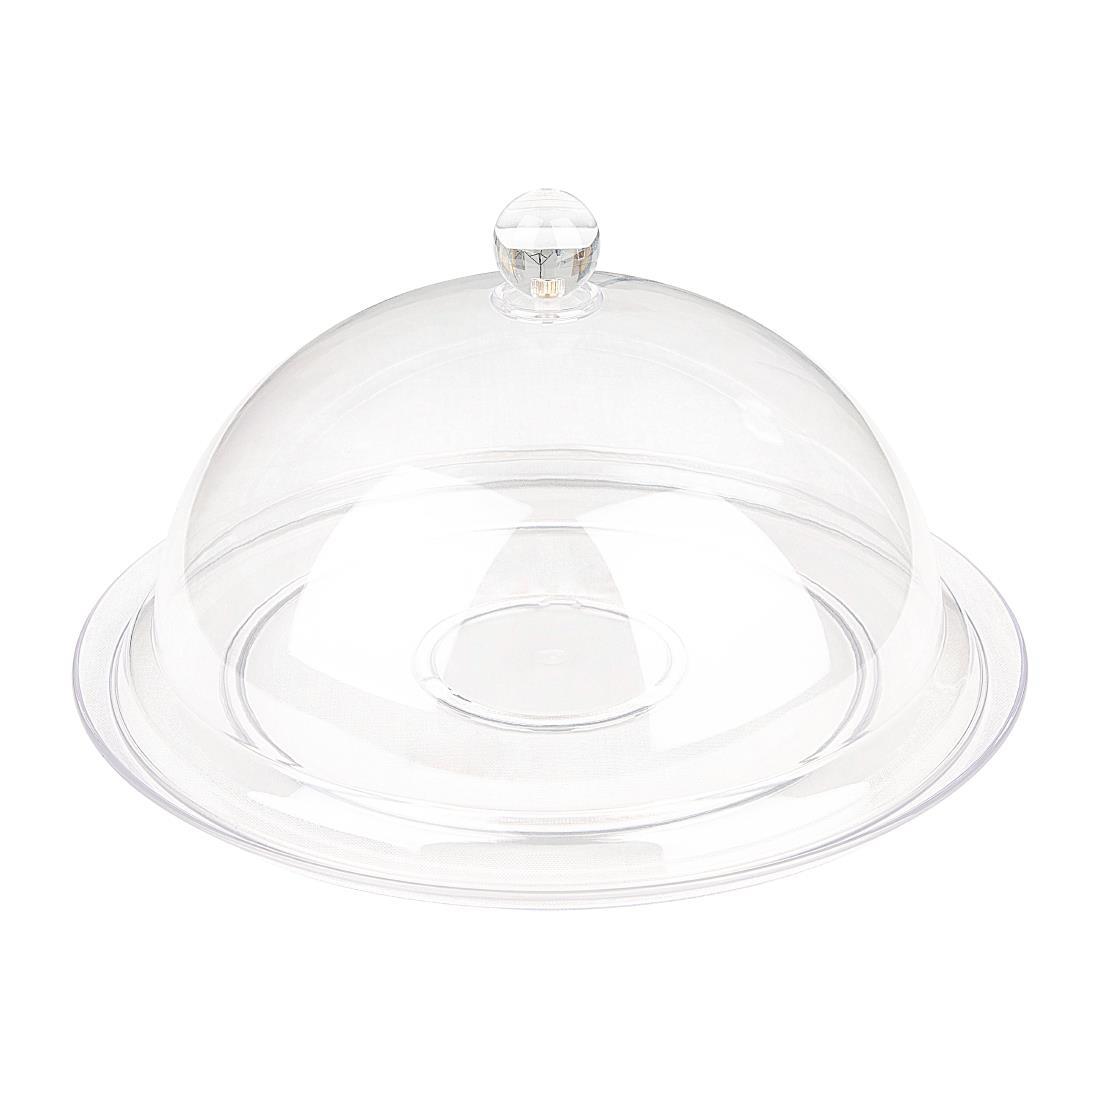 Olympia Kristallon Polycarbonate Domed Cover Clear 260(Ø) x 115(H)mm - FE471  - 2